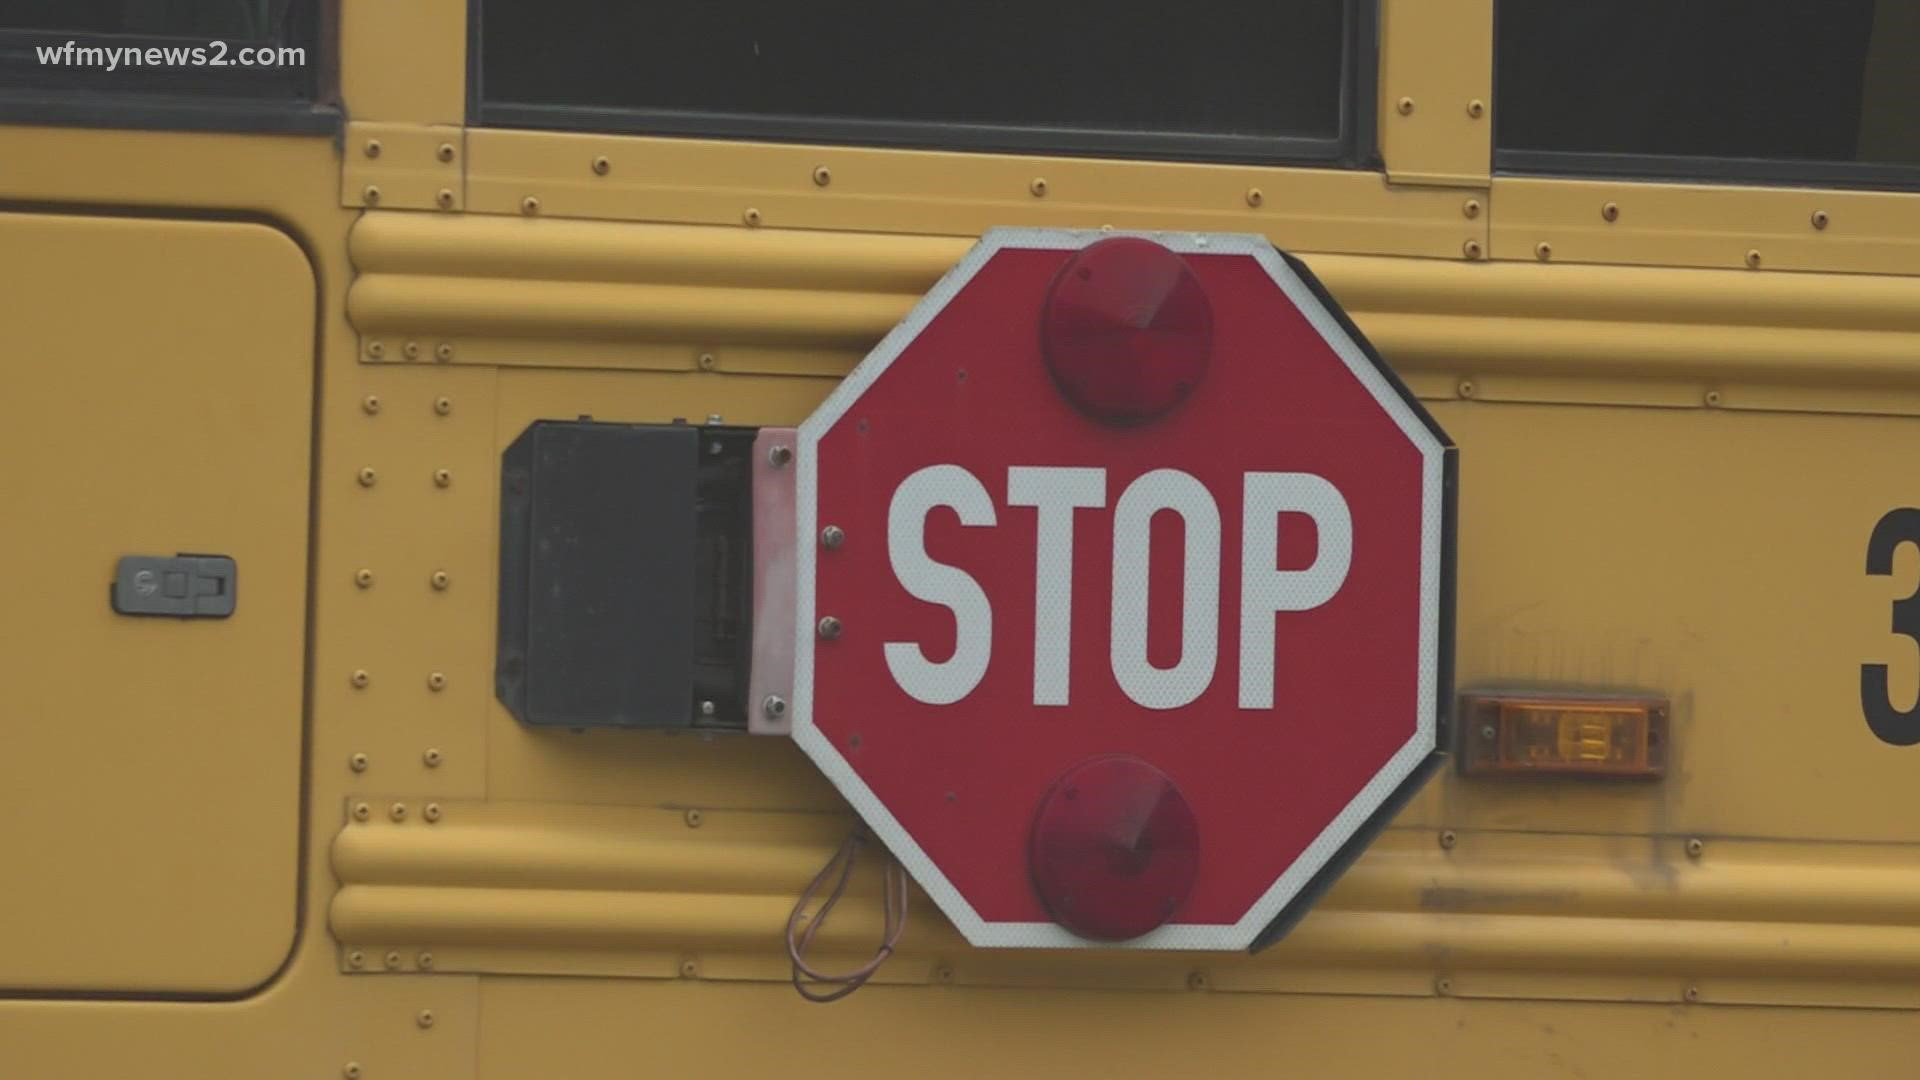 Alamance-Burlington Schools says other staff members like coaches, teacher assistants and custodians are driving routes regularly to help address the shortage.